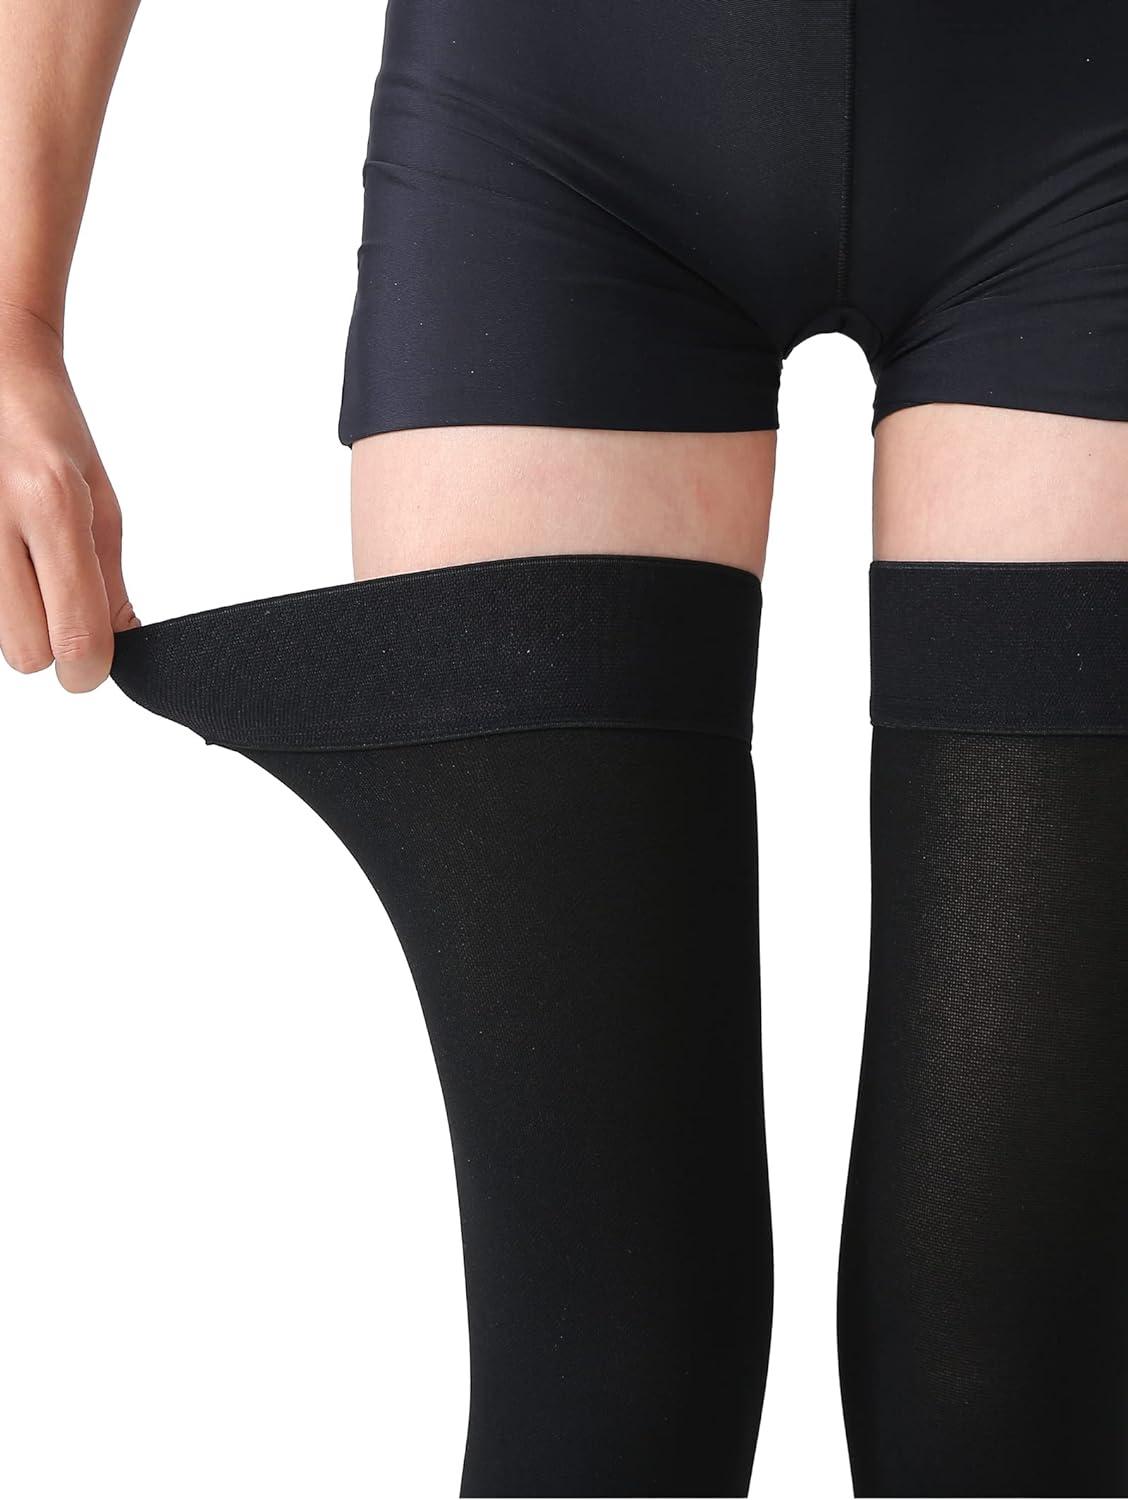 Thigh High Compression Stockings Closed Toe Pair Firm Support 20-30mmHg  Gradient Compression Socks with Silicone Band Unisex Opaque Best for Spider  & Varicose Veins Edema Swelling Black S Small Black